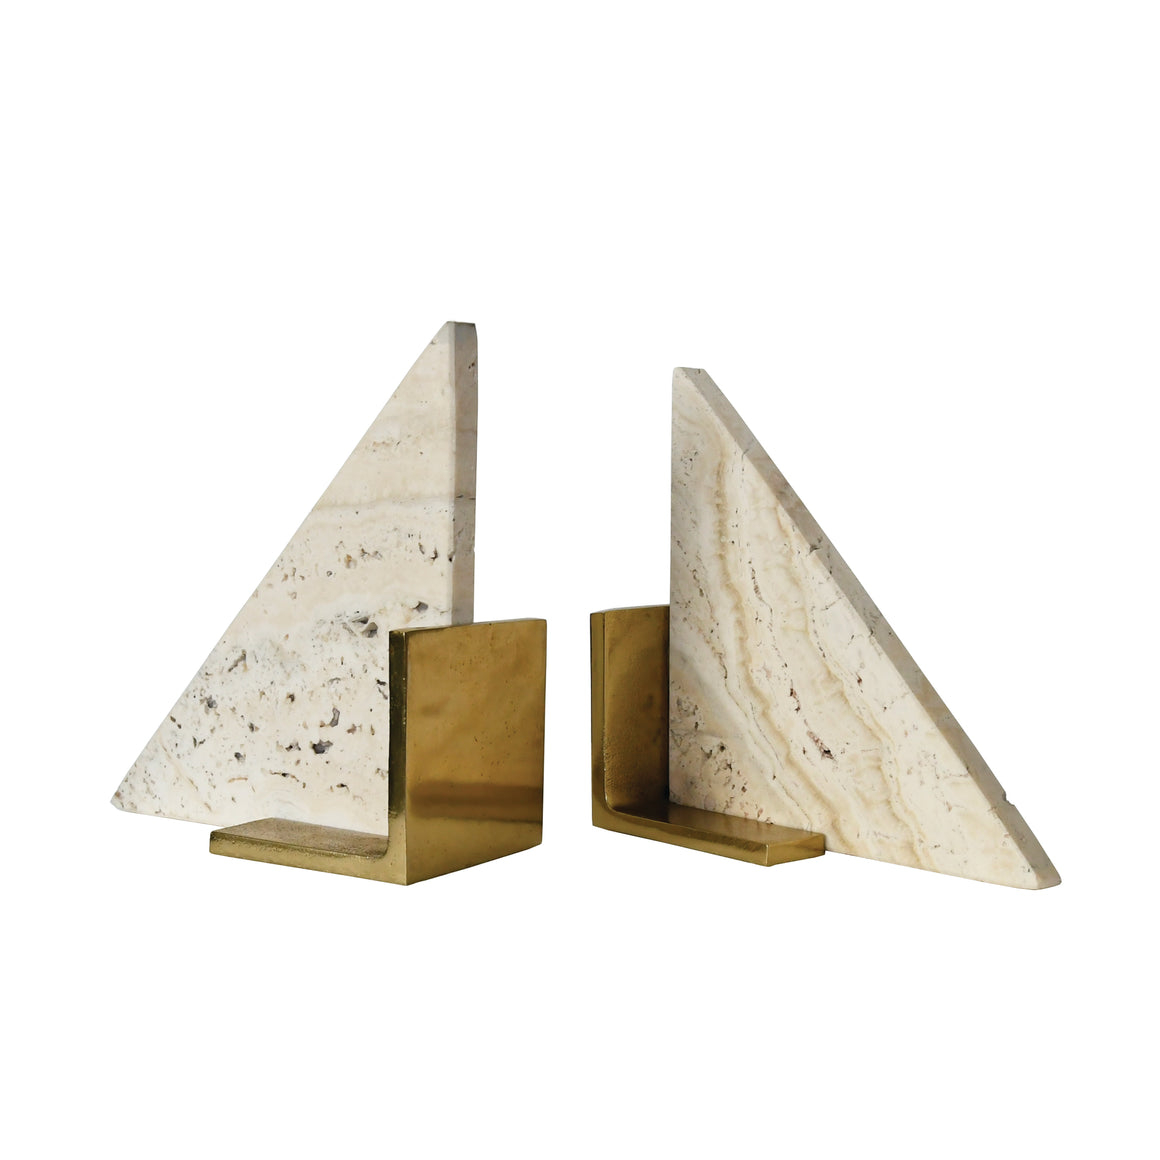 Trio Triangle Shaped Travertine Bookends with Brass Base